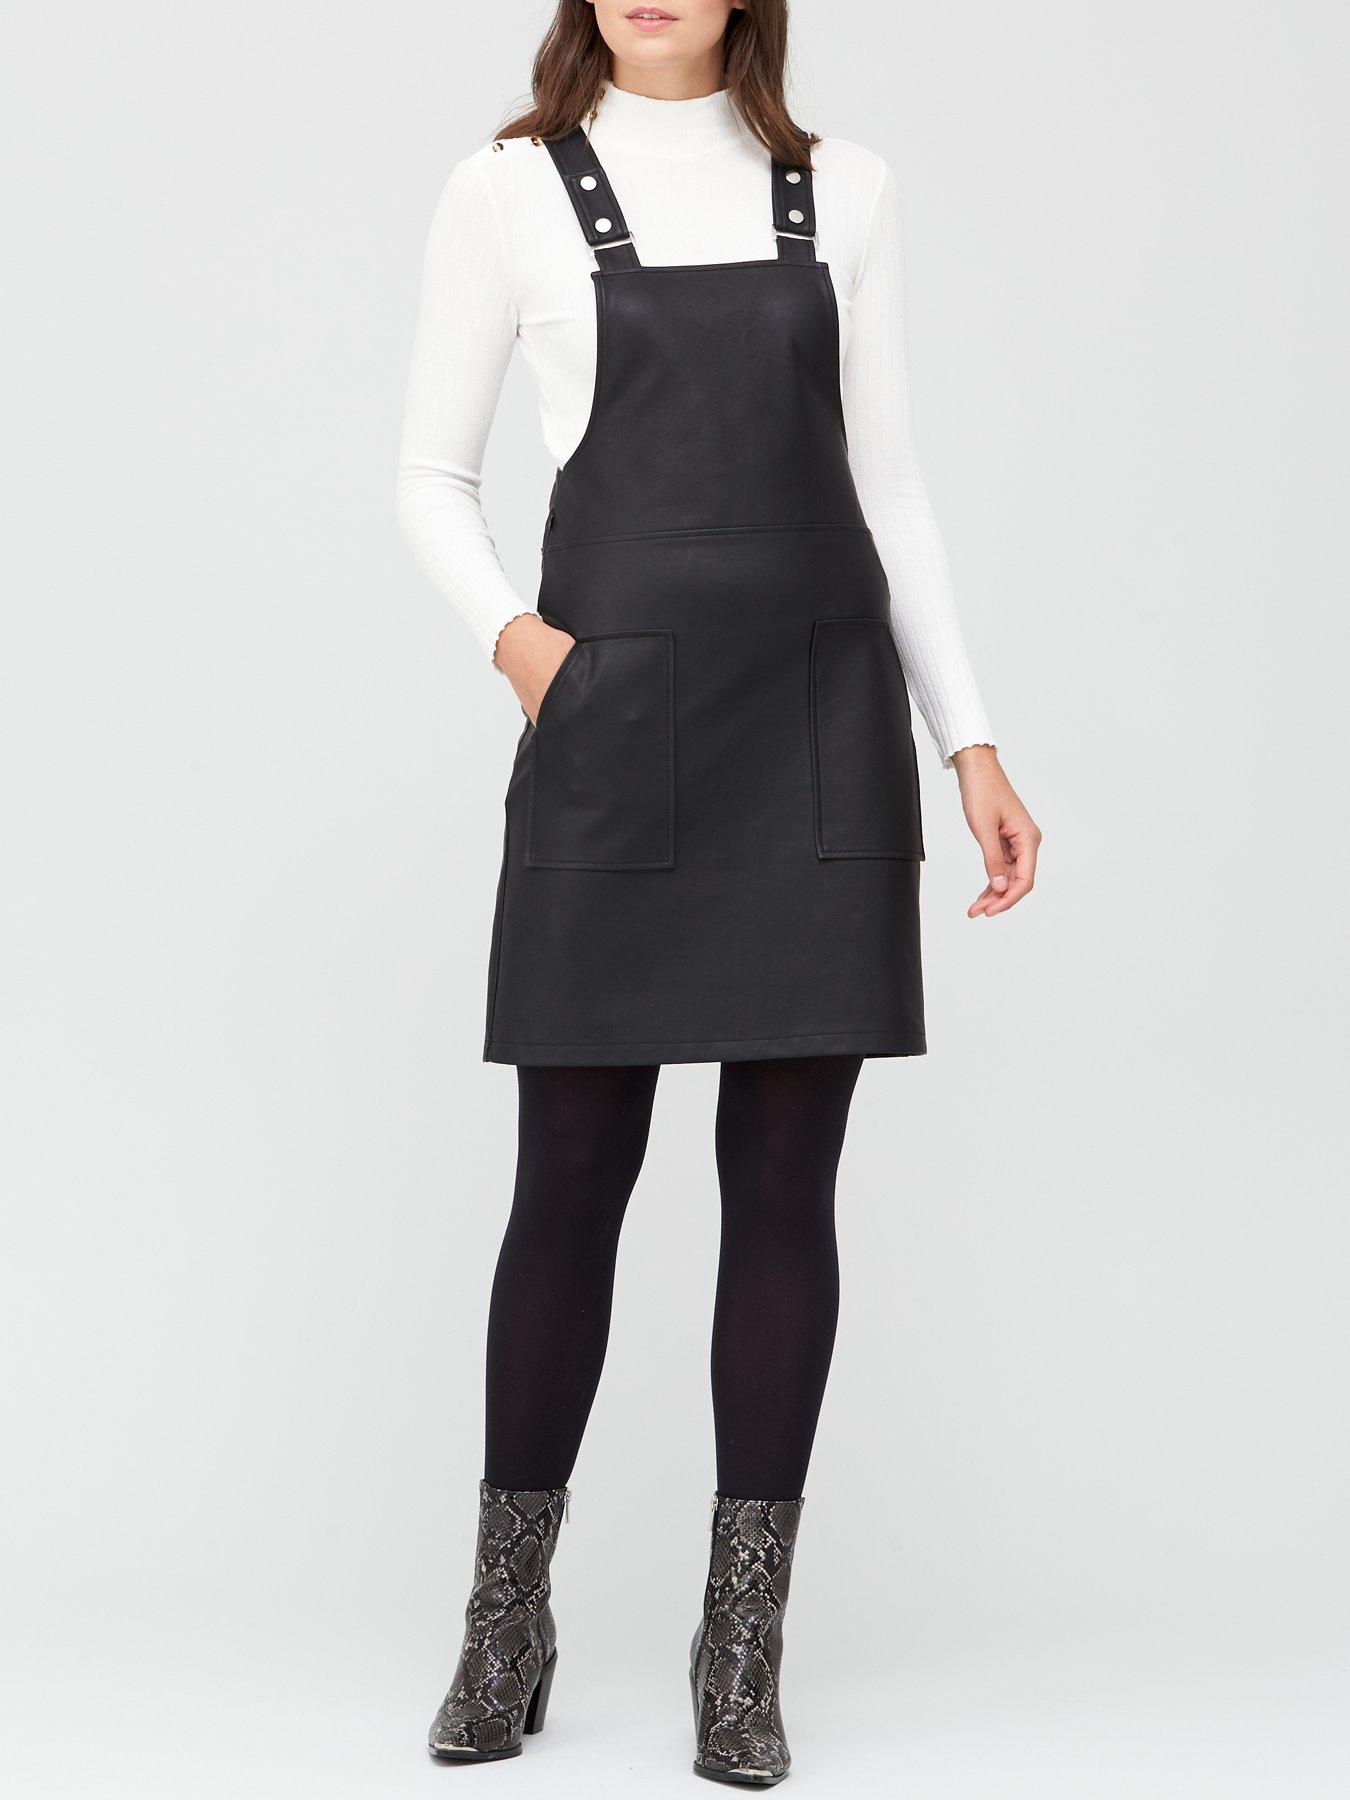 black pinafore dress outfit